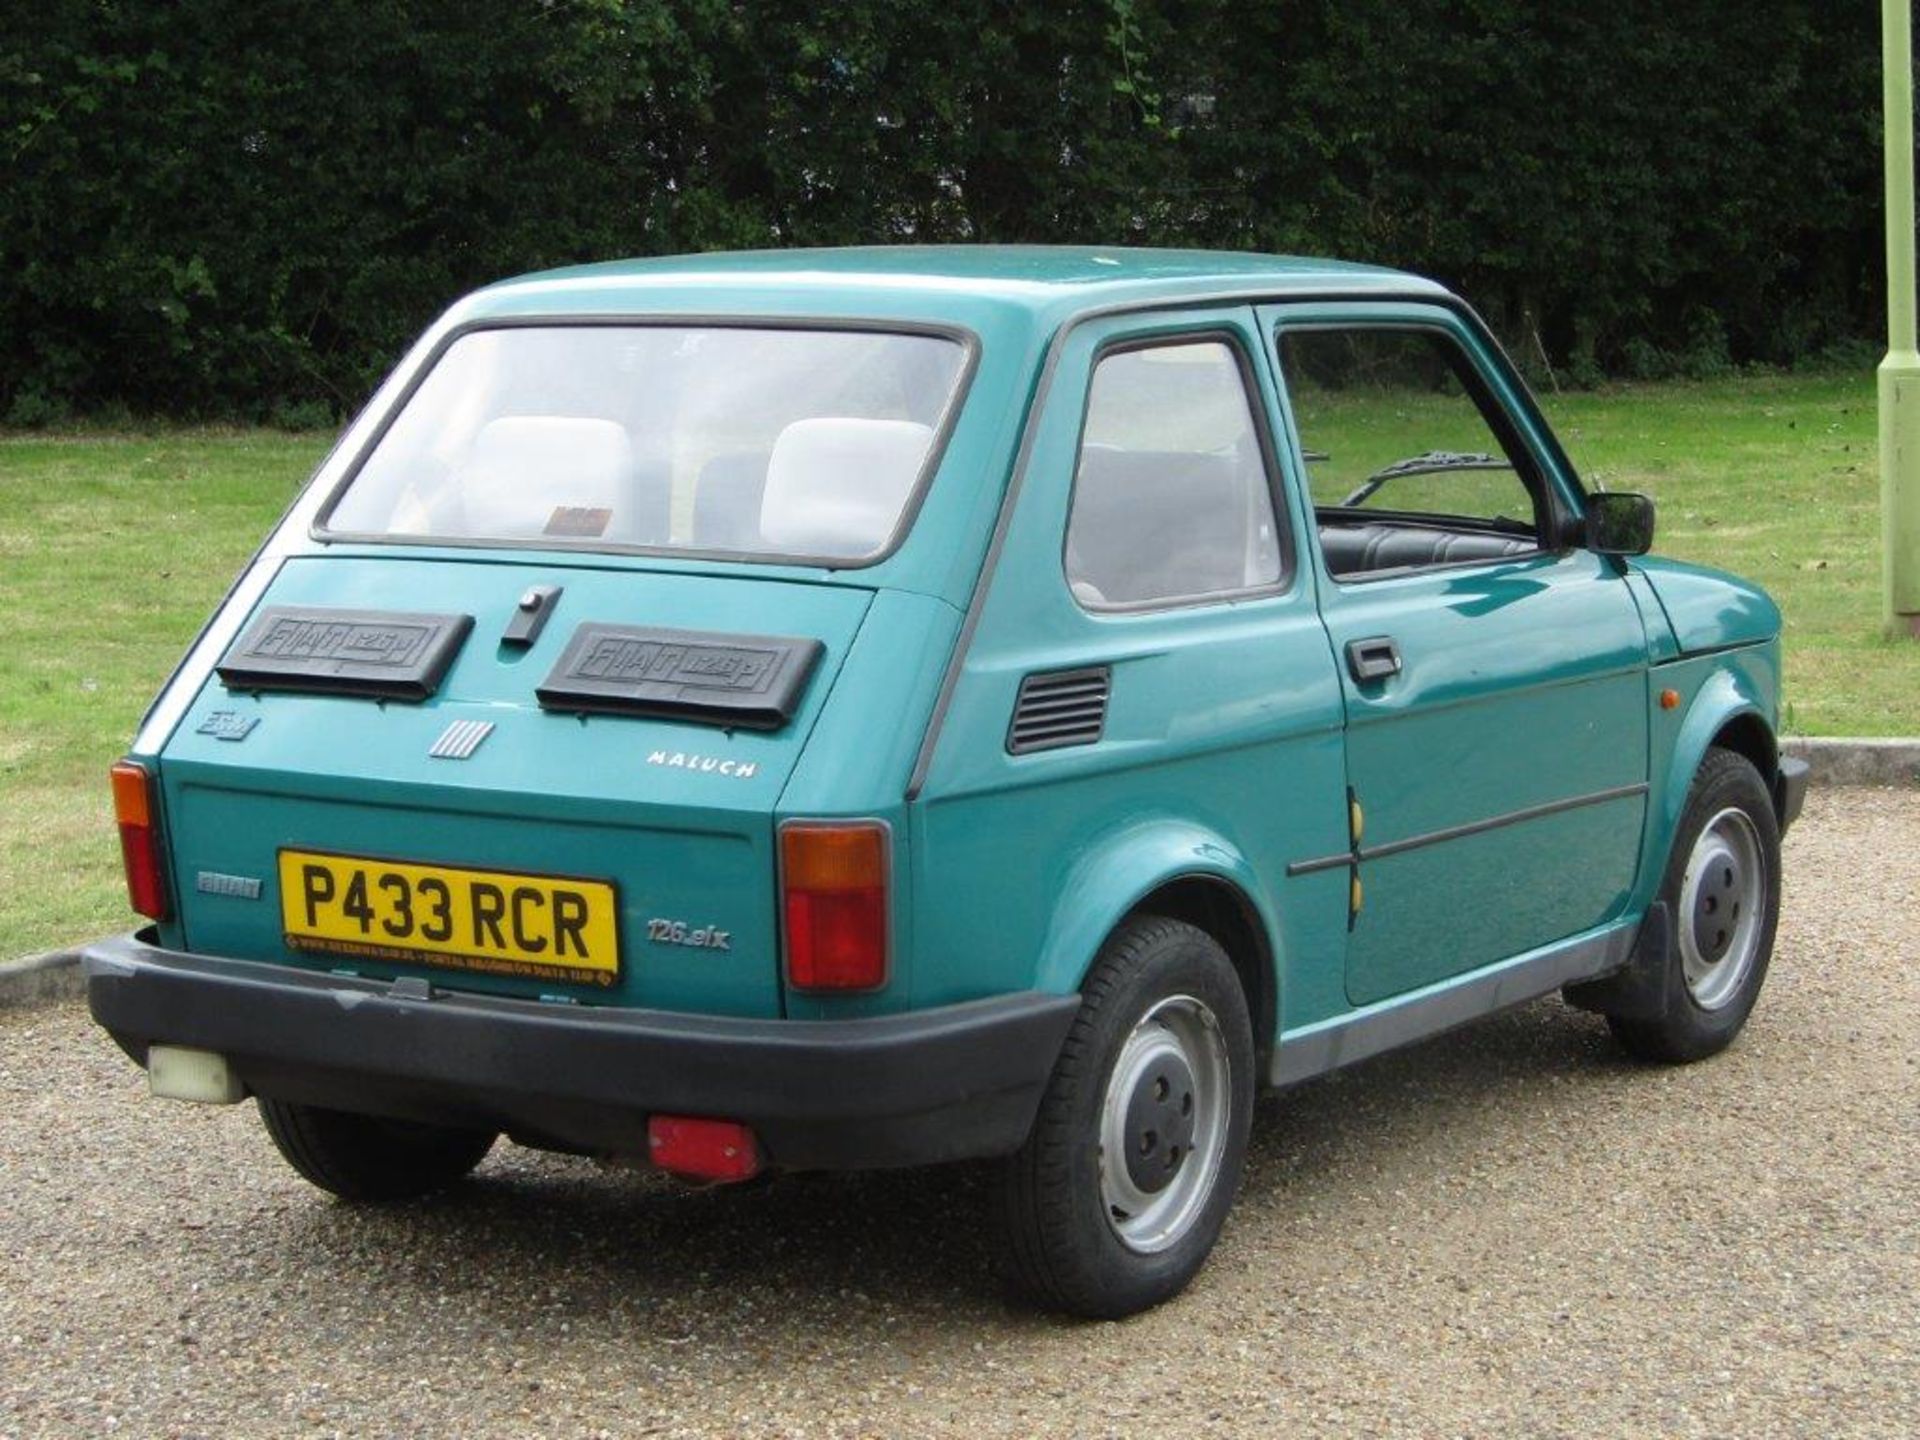 1997 Fiat 126P ELX LHD - Image 6 of 10